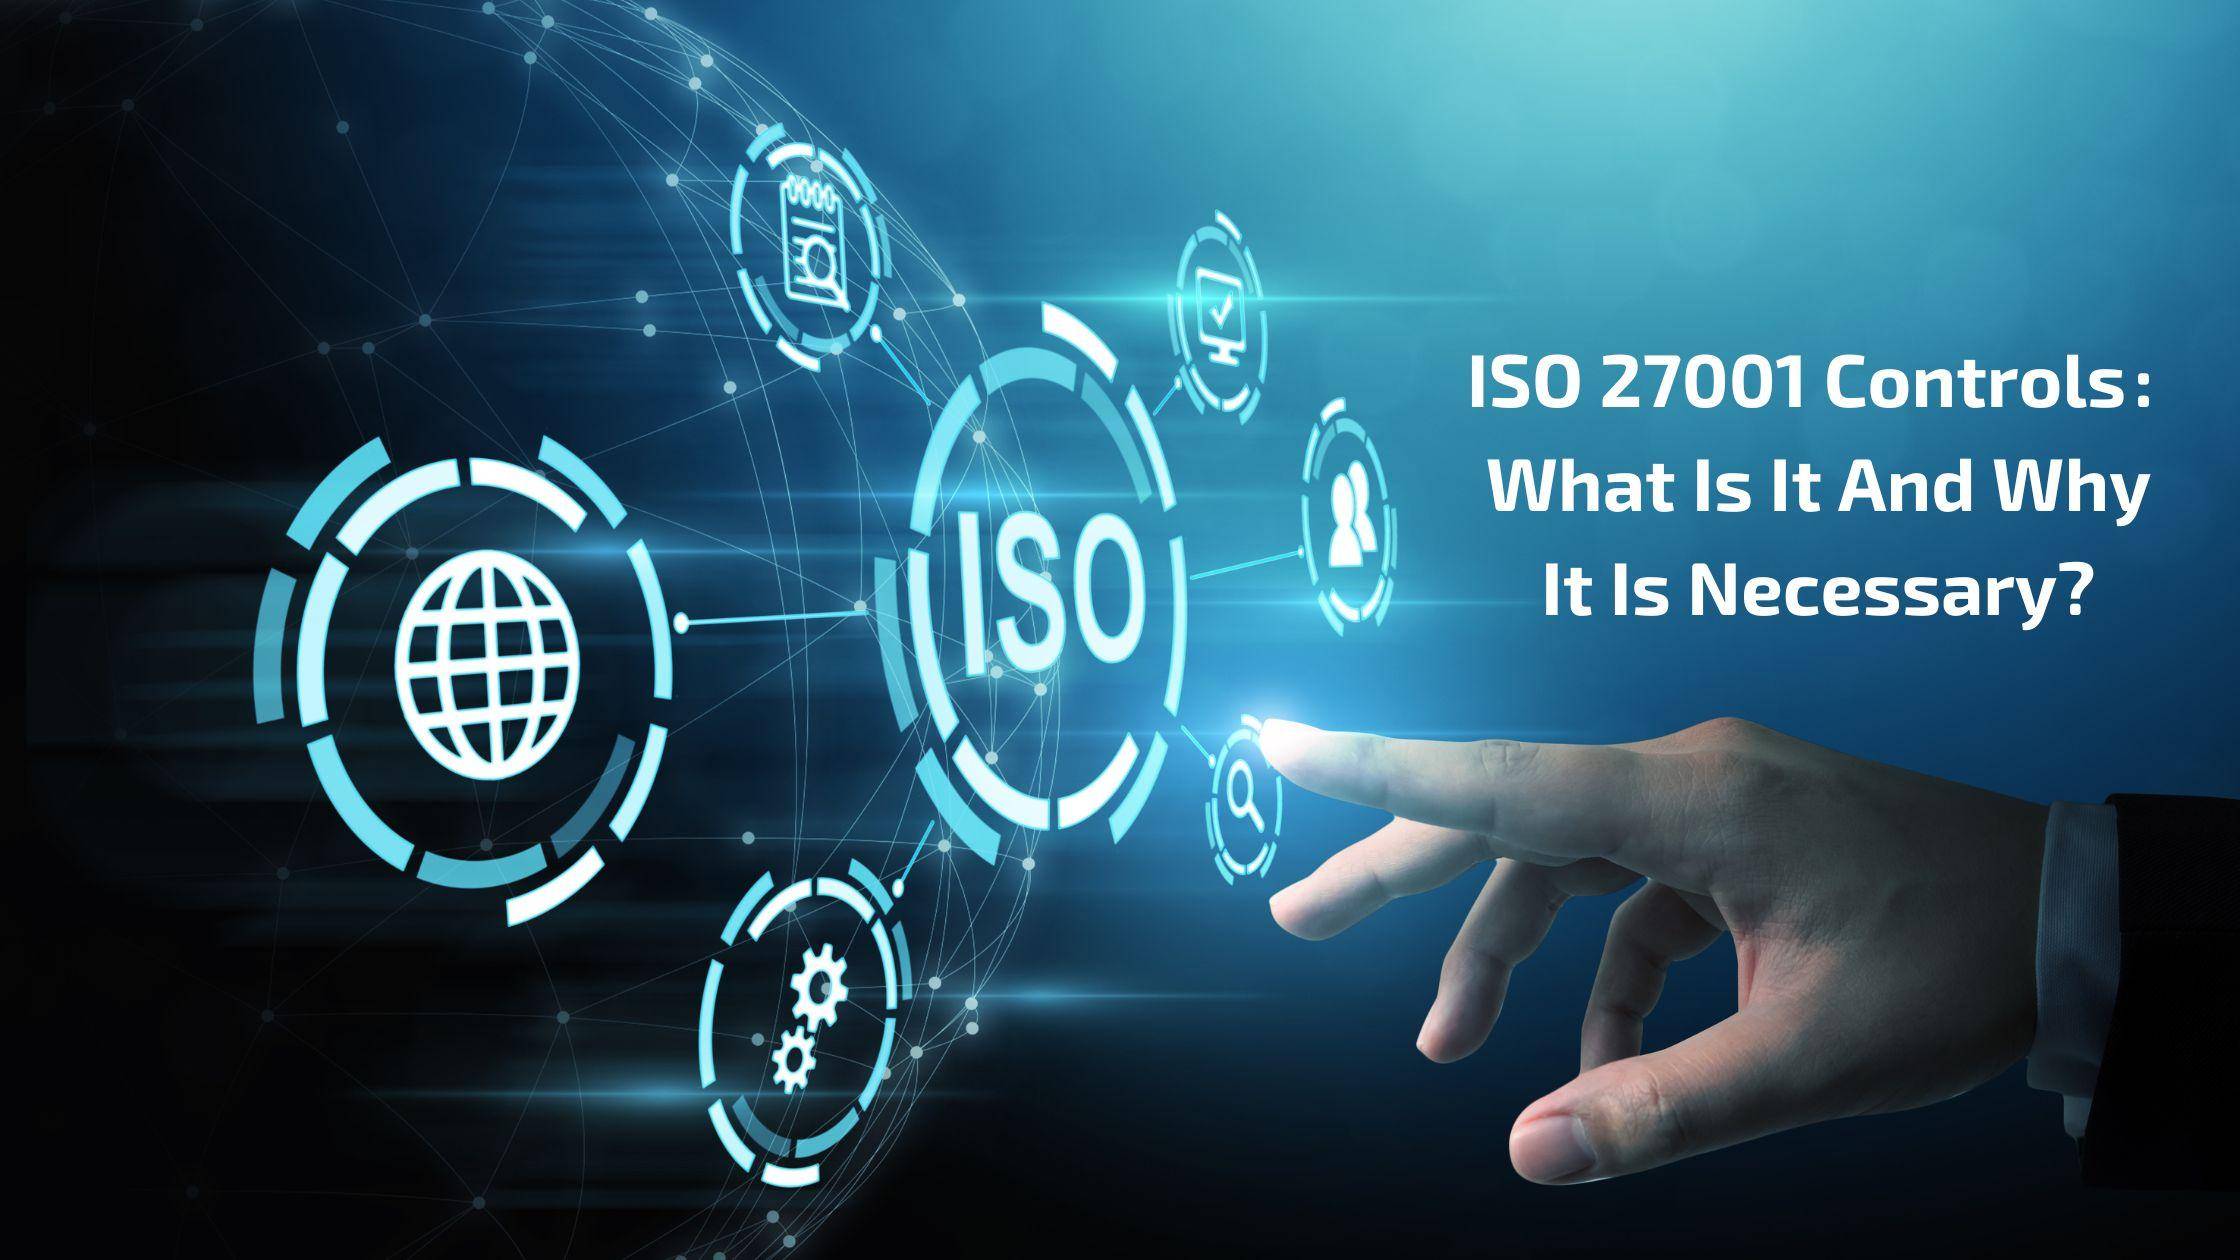 ISO 27001 Controls: What is it and why it is necessary?